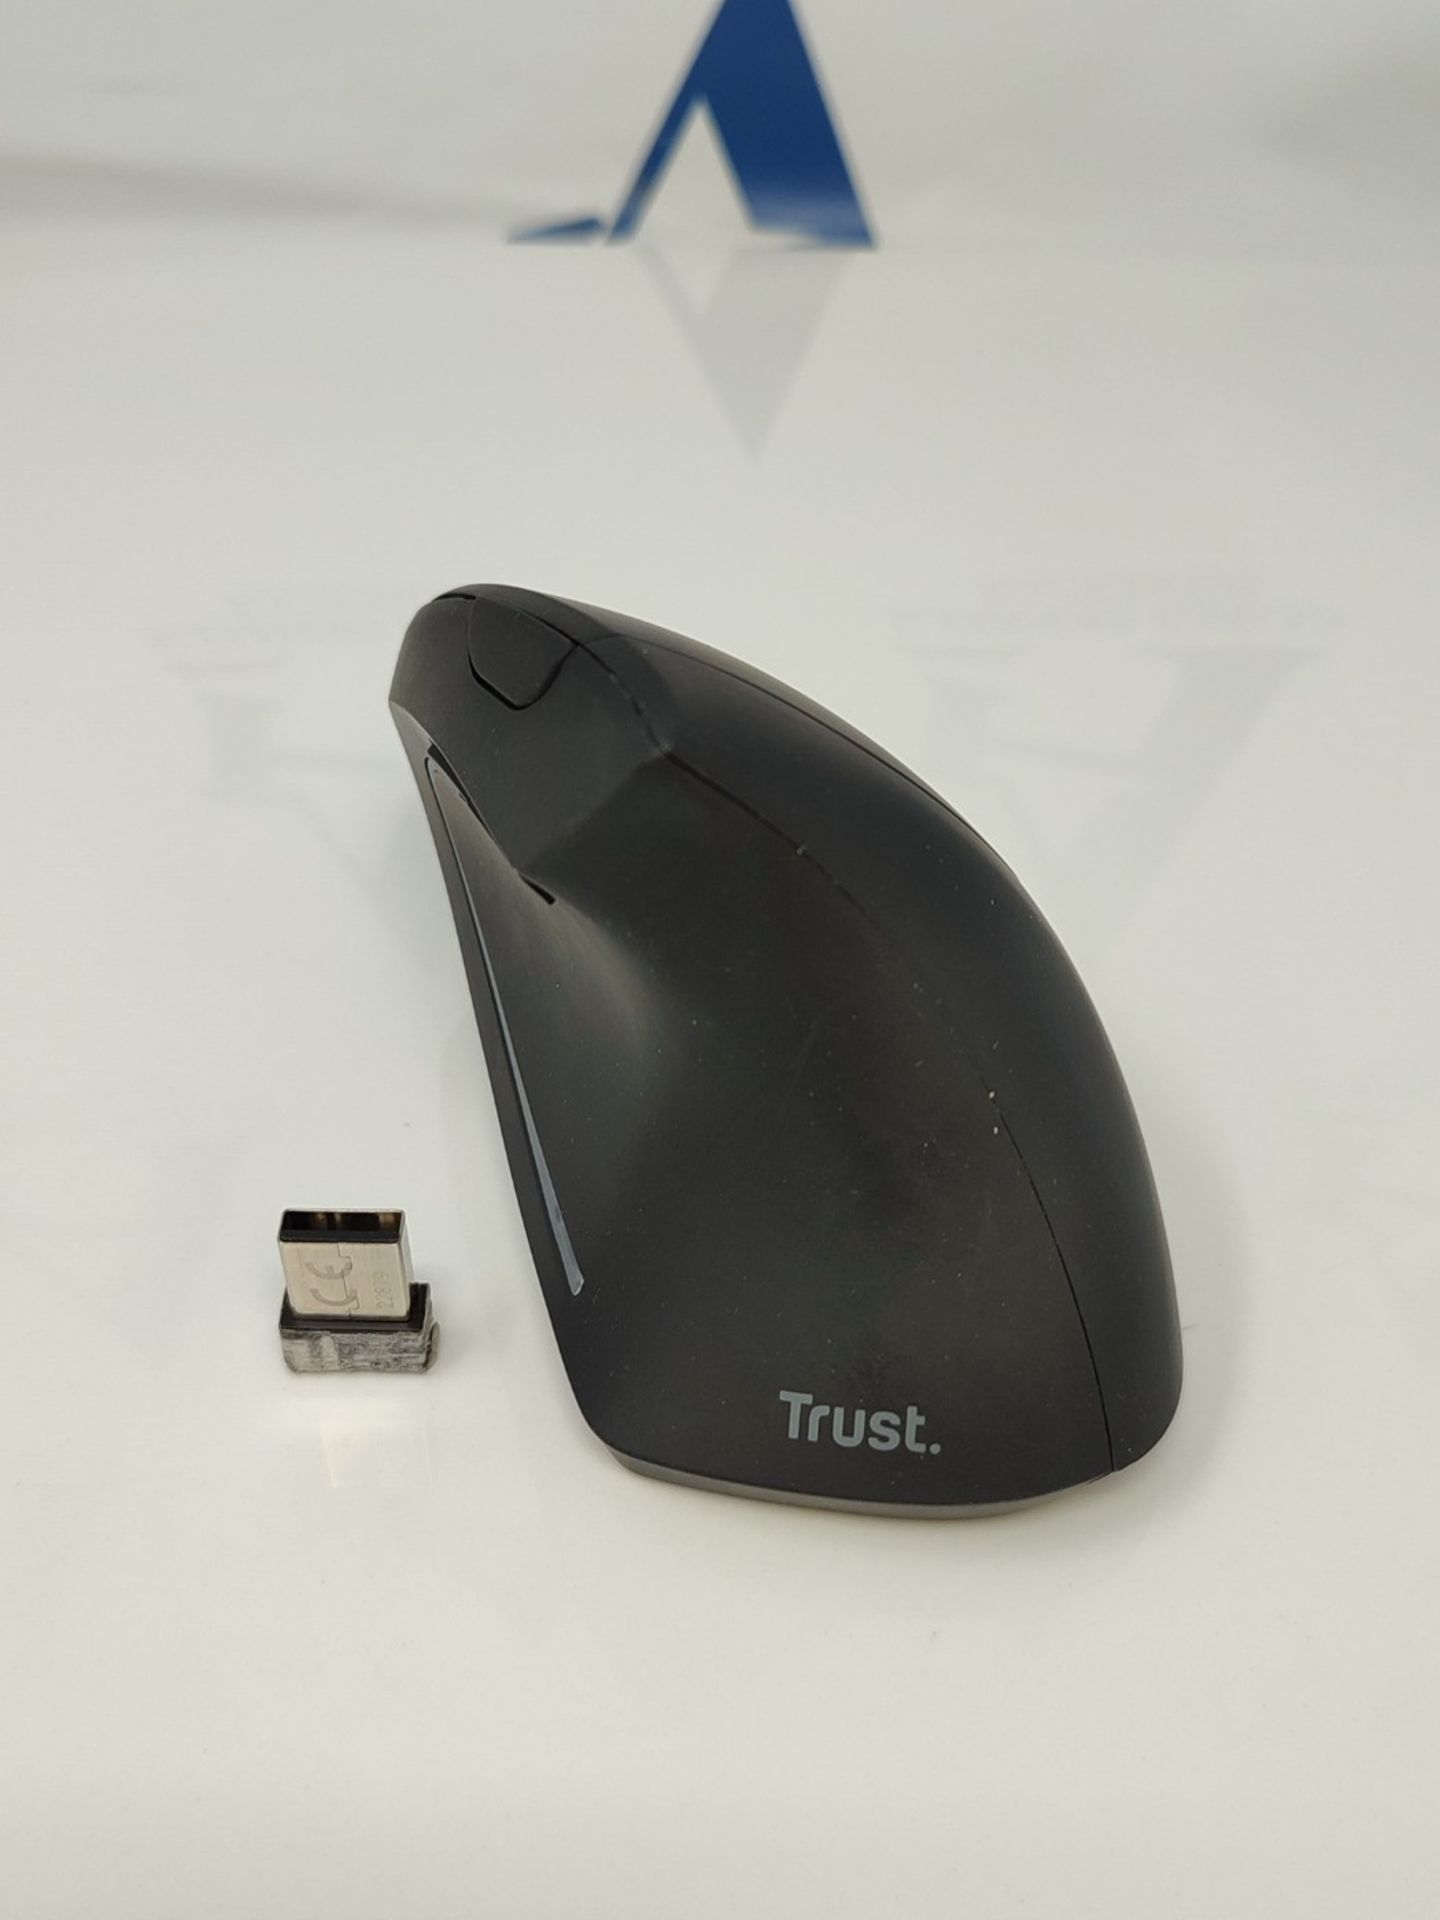 Trust Verto Wireless Vertical Mouse, Ergonomic Vertical Mouse, 800-1600 DPI, 6 Buttons - Image 3 of 3